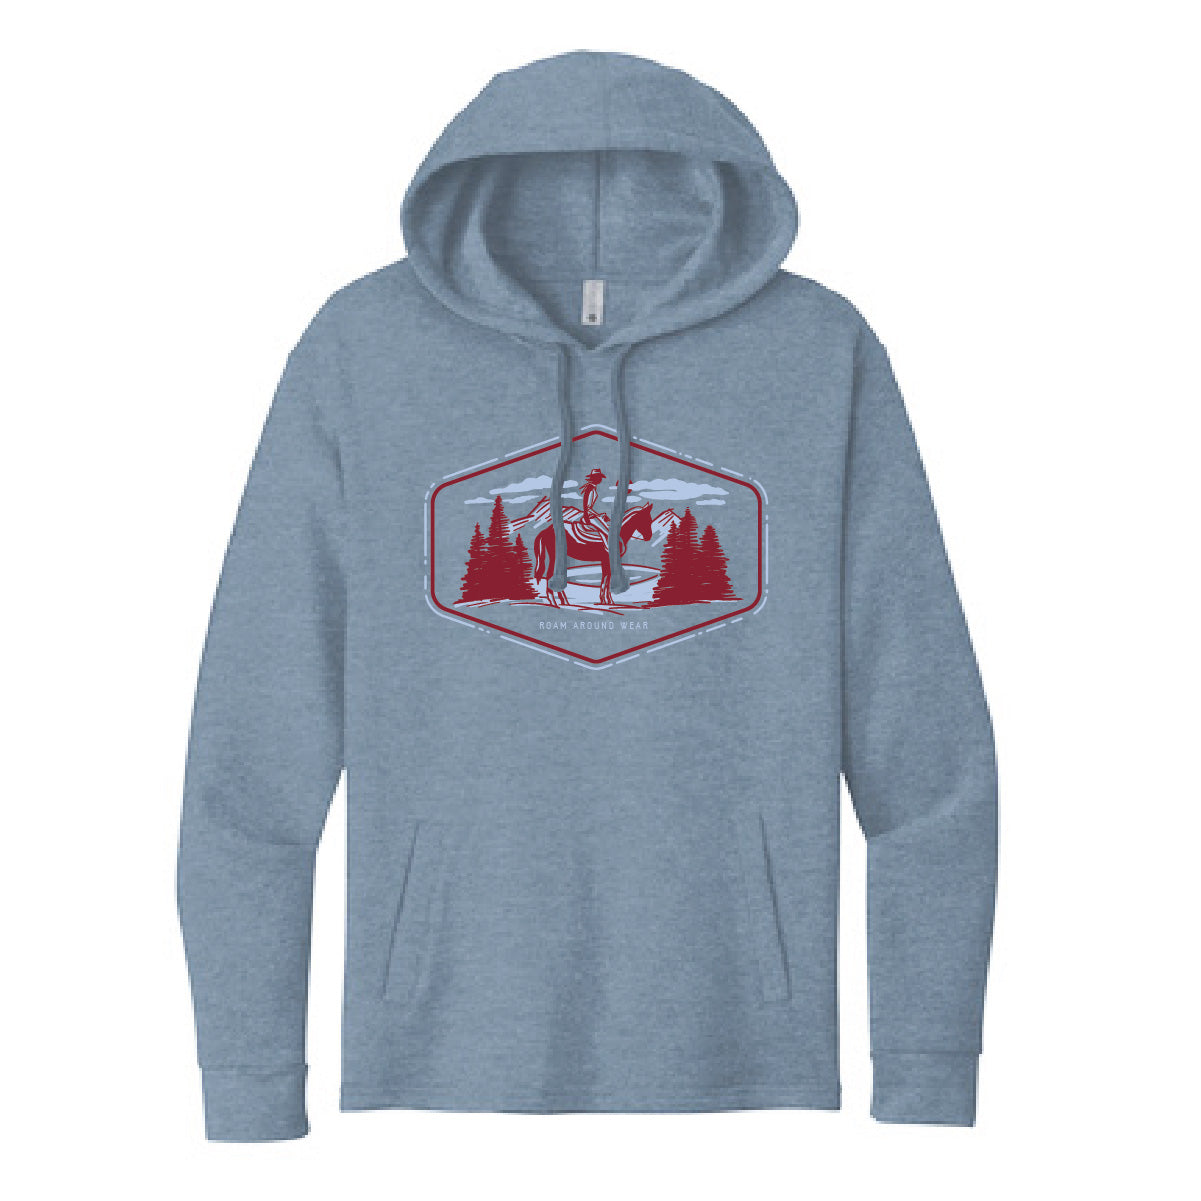 Americana cowgirl on horse hoodie. Hooded Sweatshirt. Western americana tee. Roam Around Wear is a Wyoming t-shirt company based out of Gillette, Wyoming